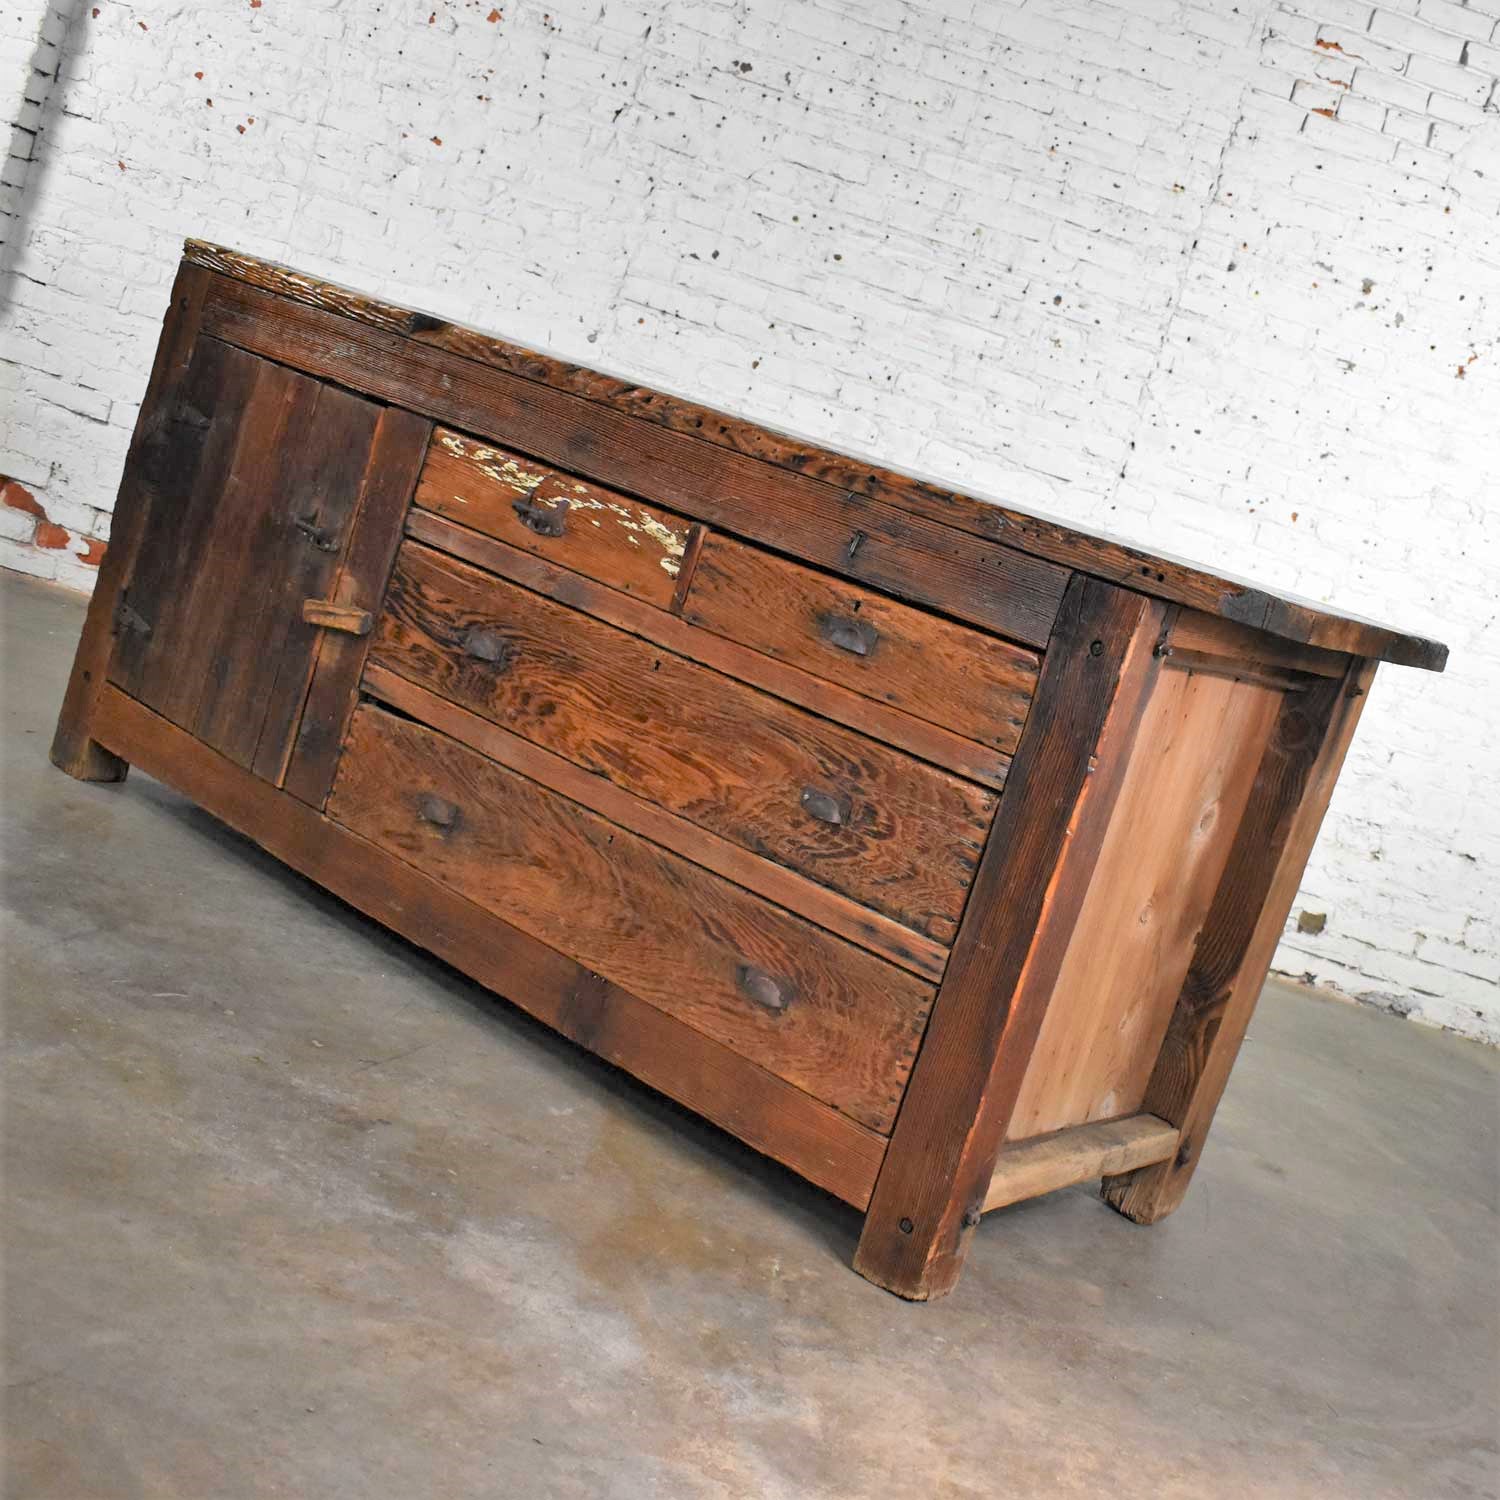 Antique Rustic Primitive Pine Factory Cabinet or Work Bench with Age Patina